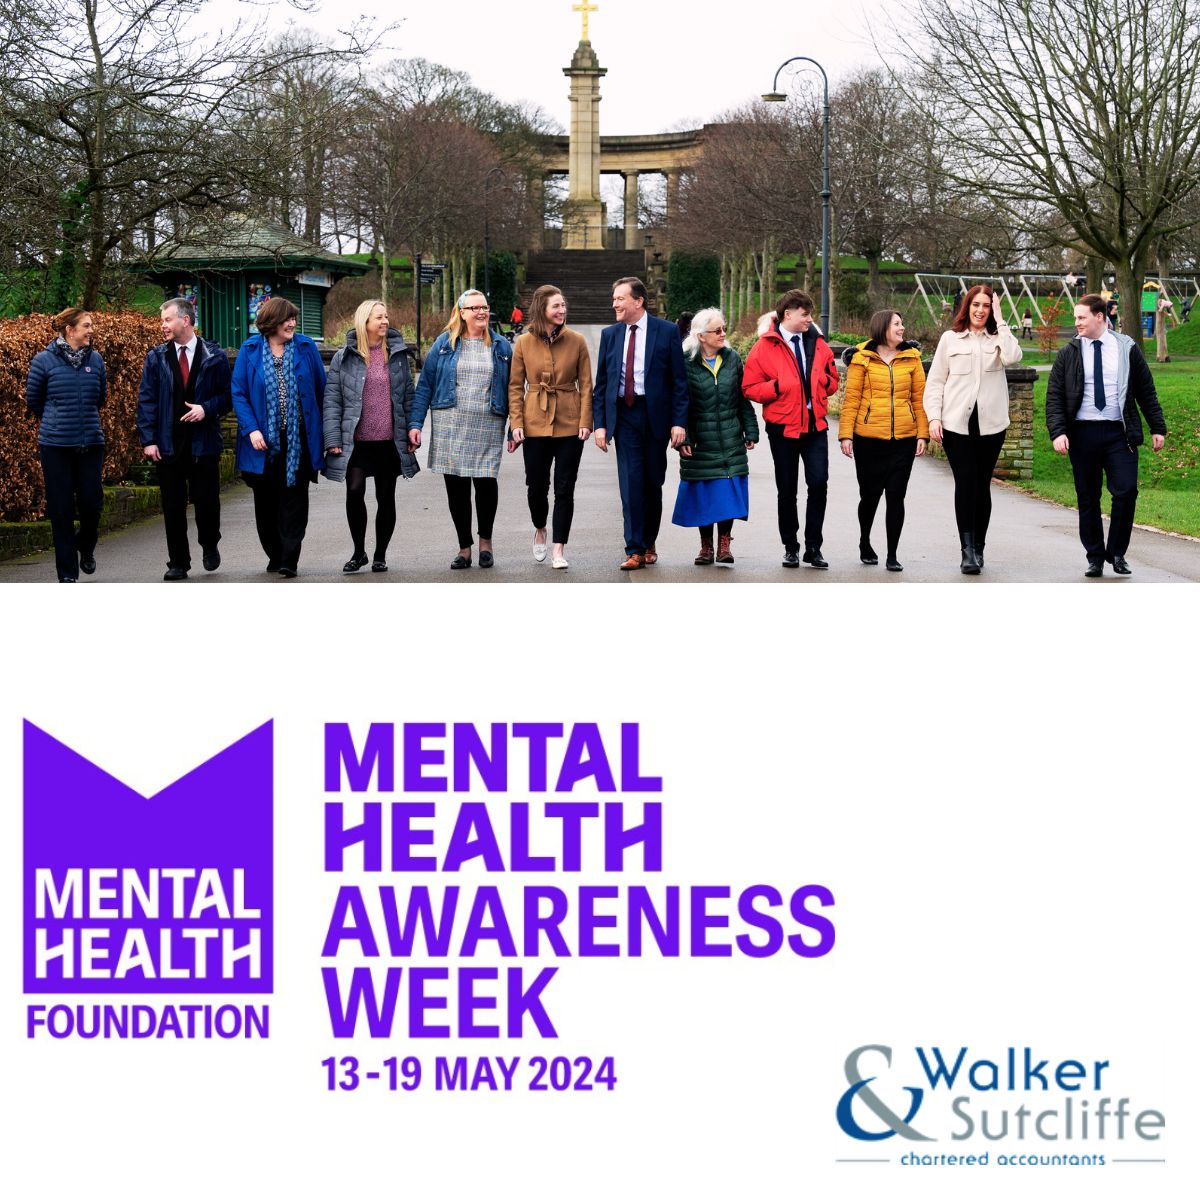 We're proud to support our team's well-being & growth!
During @mentalhealth's #MentalHealthAwarenessWeek, we're encouraging our team to use their well-being time to create a #MomentForMovement. It's not just about work, it's about being a family that cares.💚

#WellbeingAtWork